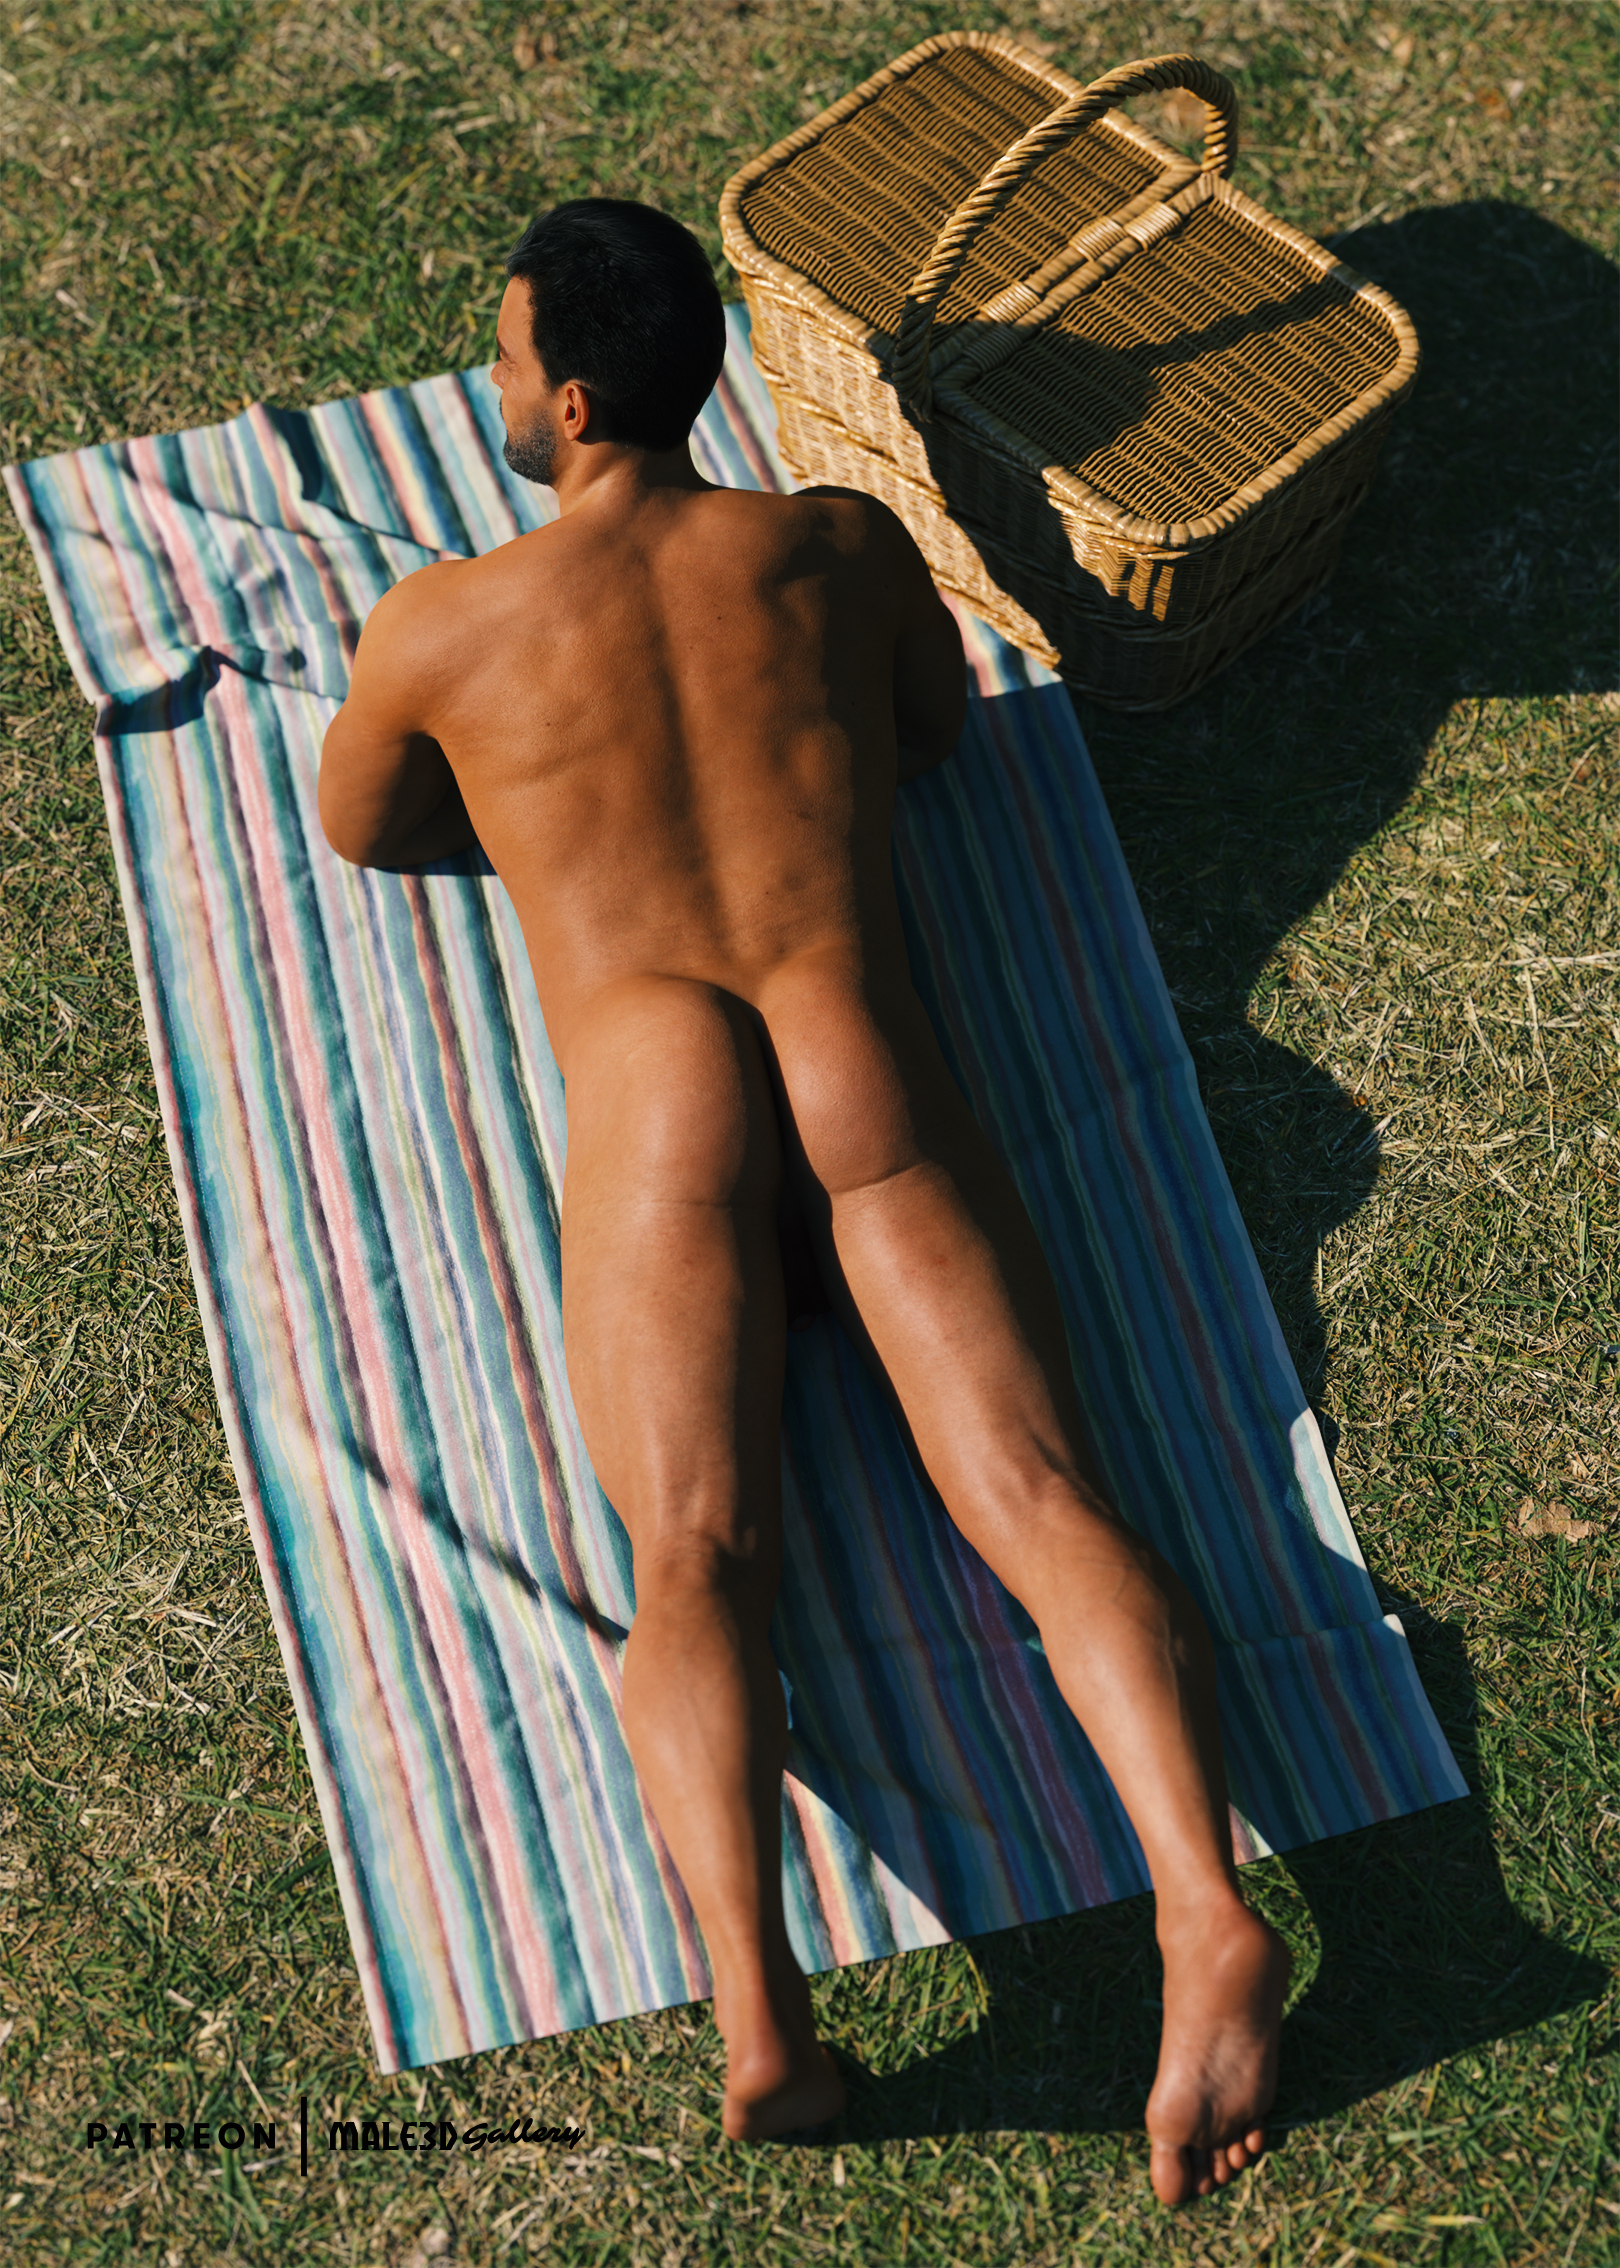 Picnic in the Nude